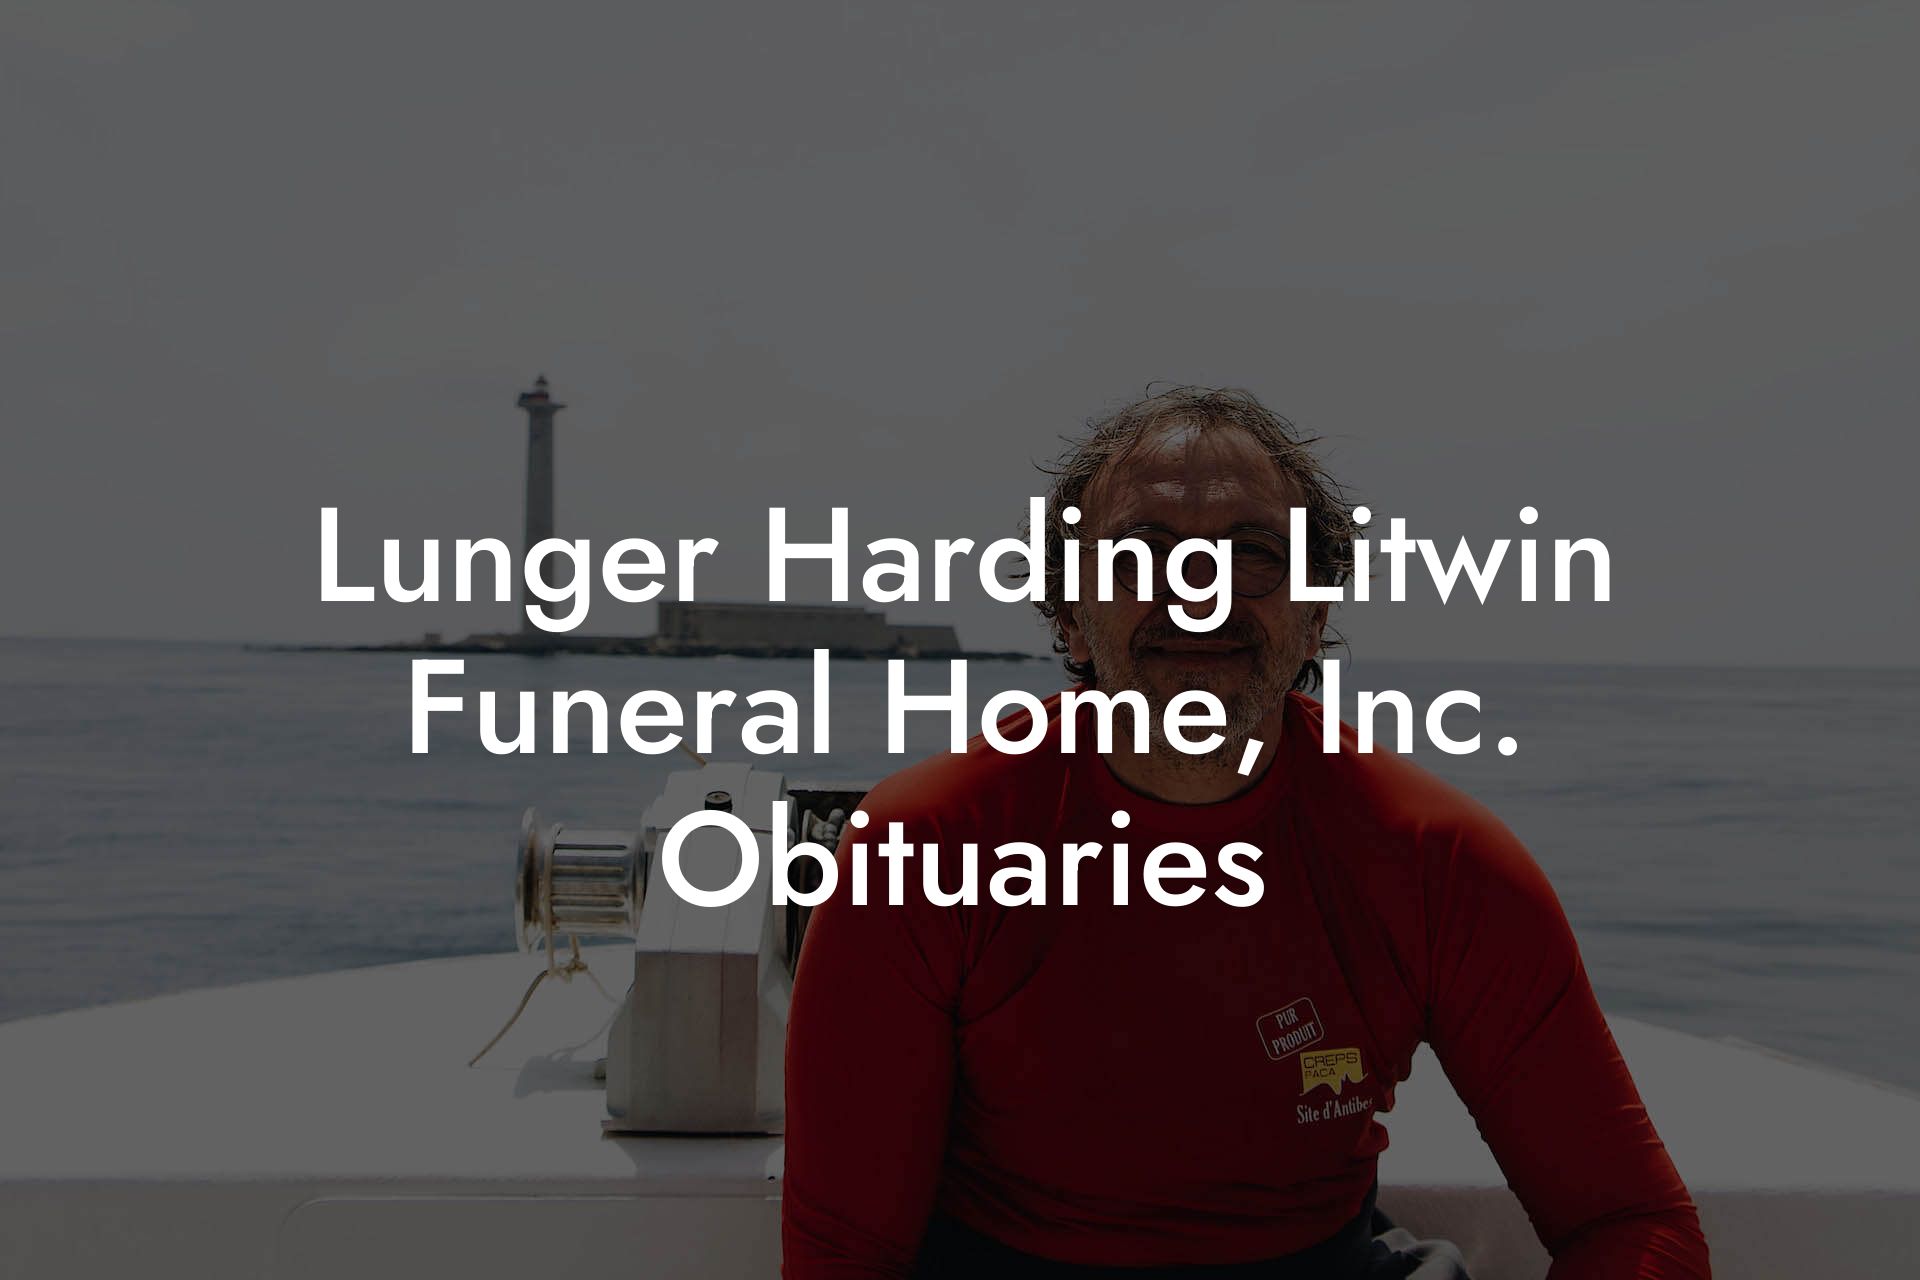 Lunger Harding Litwin Funeral Home, Inc. Obituaries